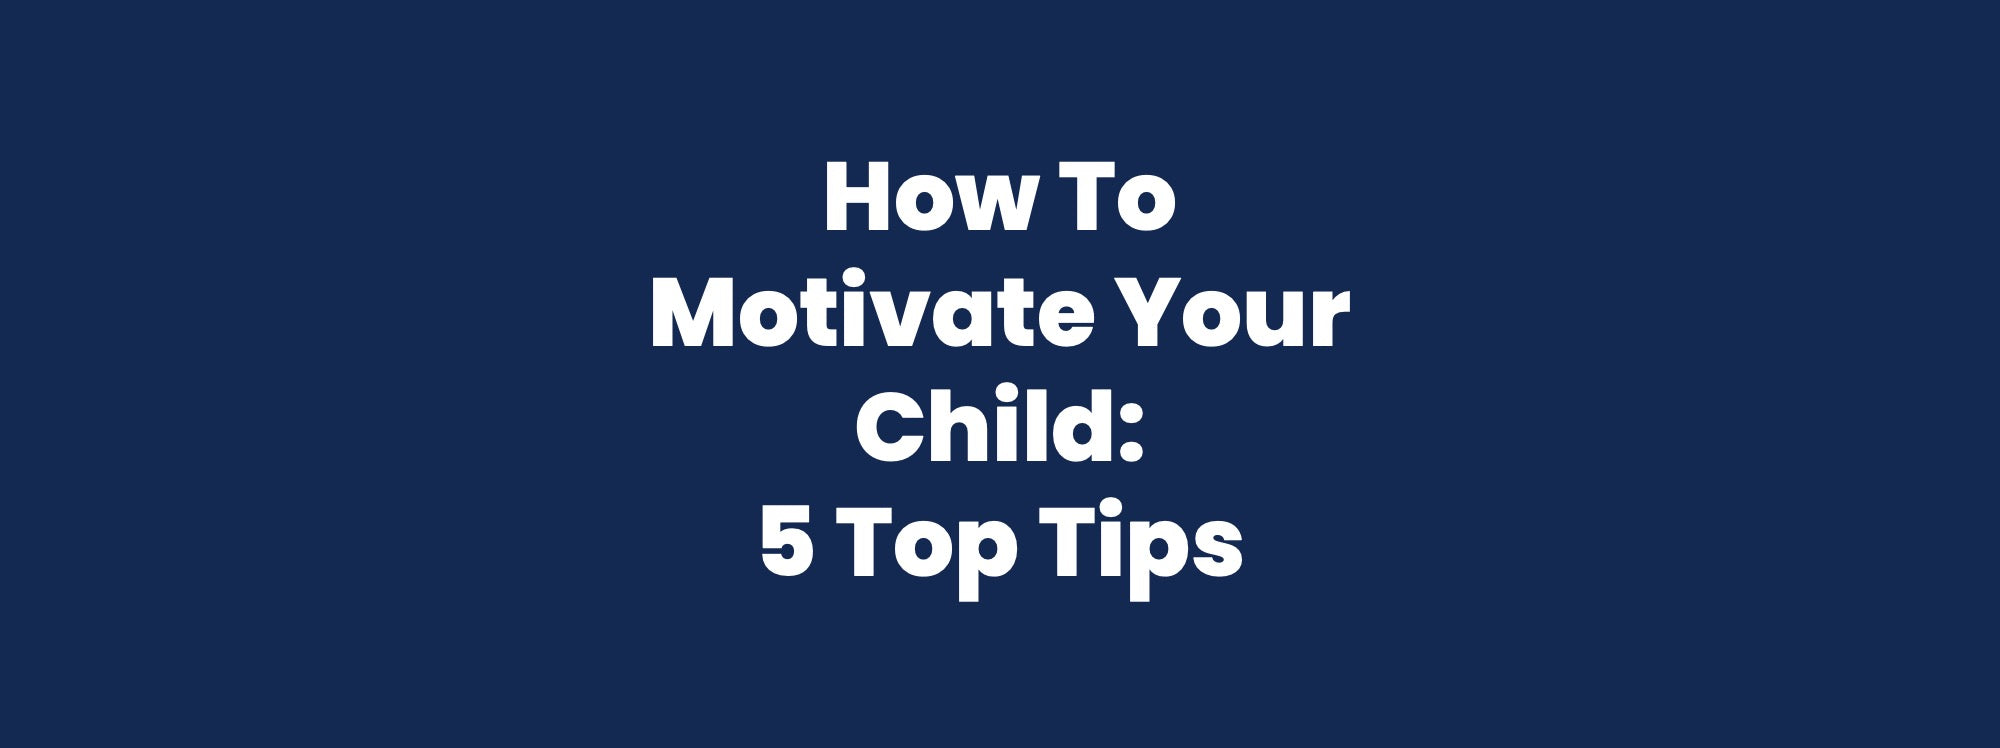 How To Motivate Your Child: 5 Top Tips